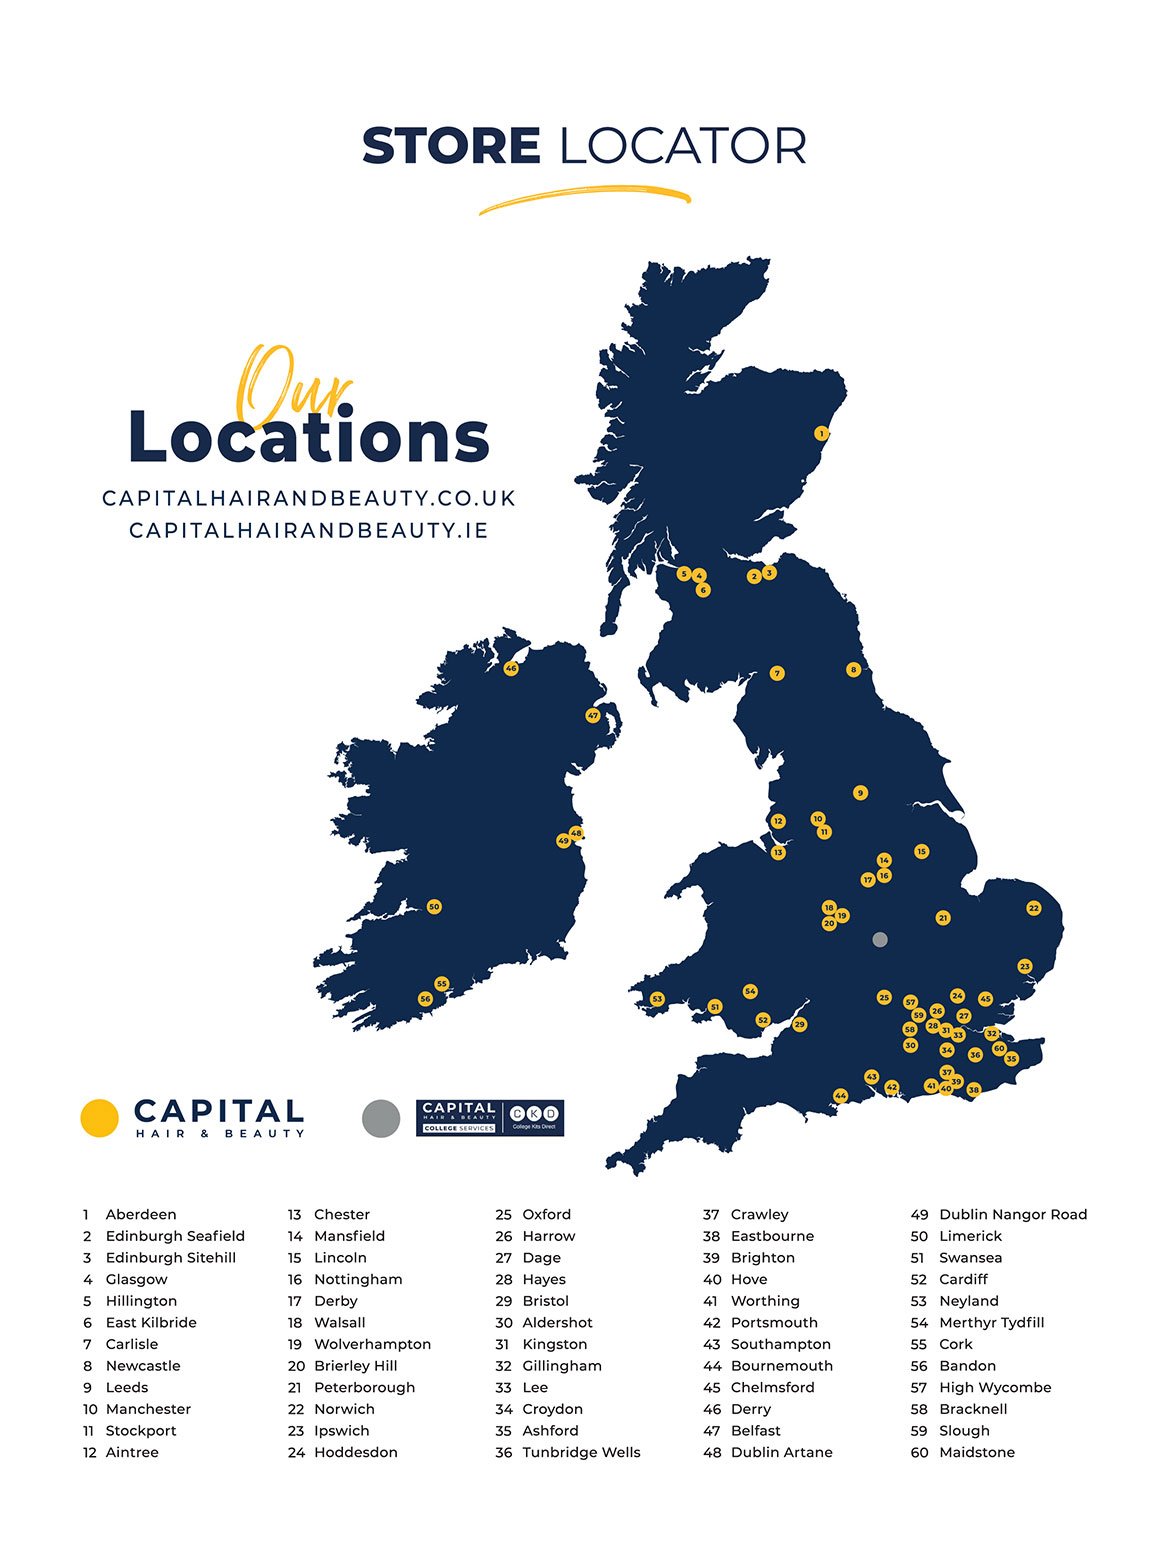 Capital Hair and Beauty Store Locations Map